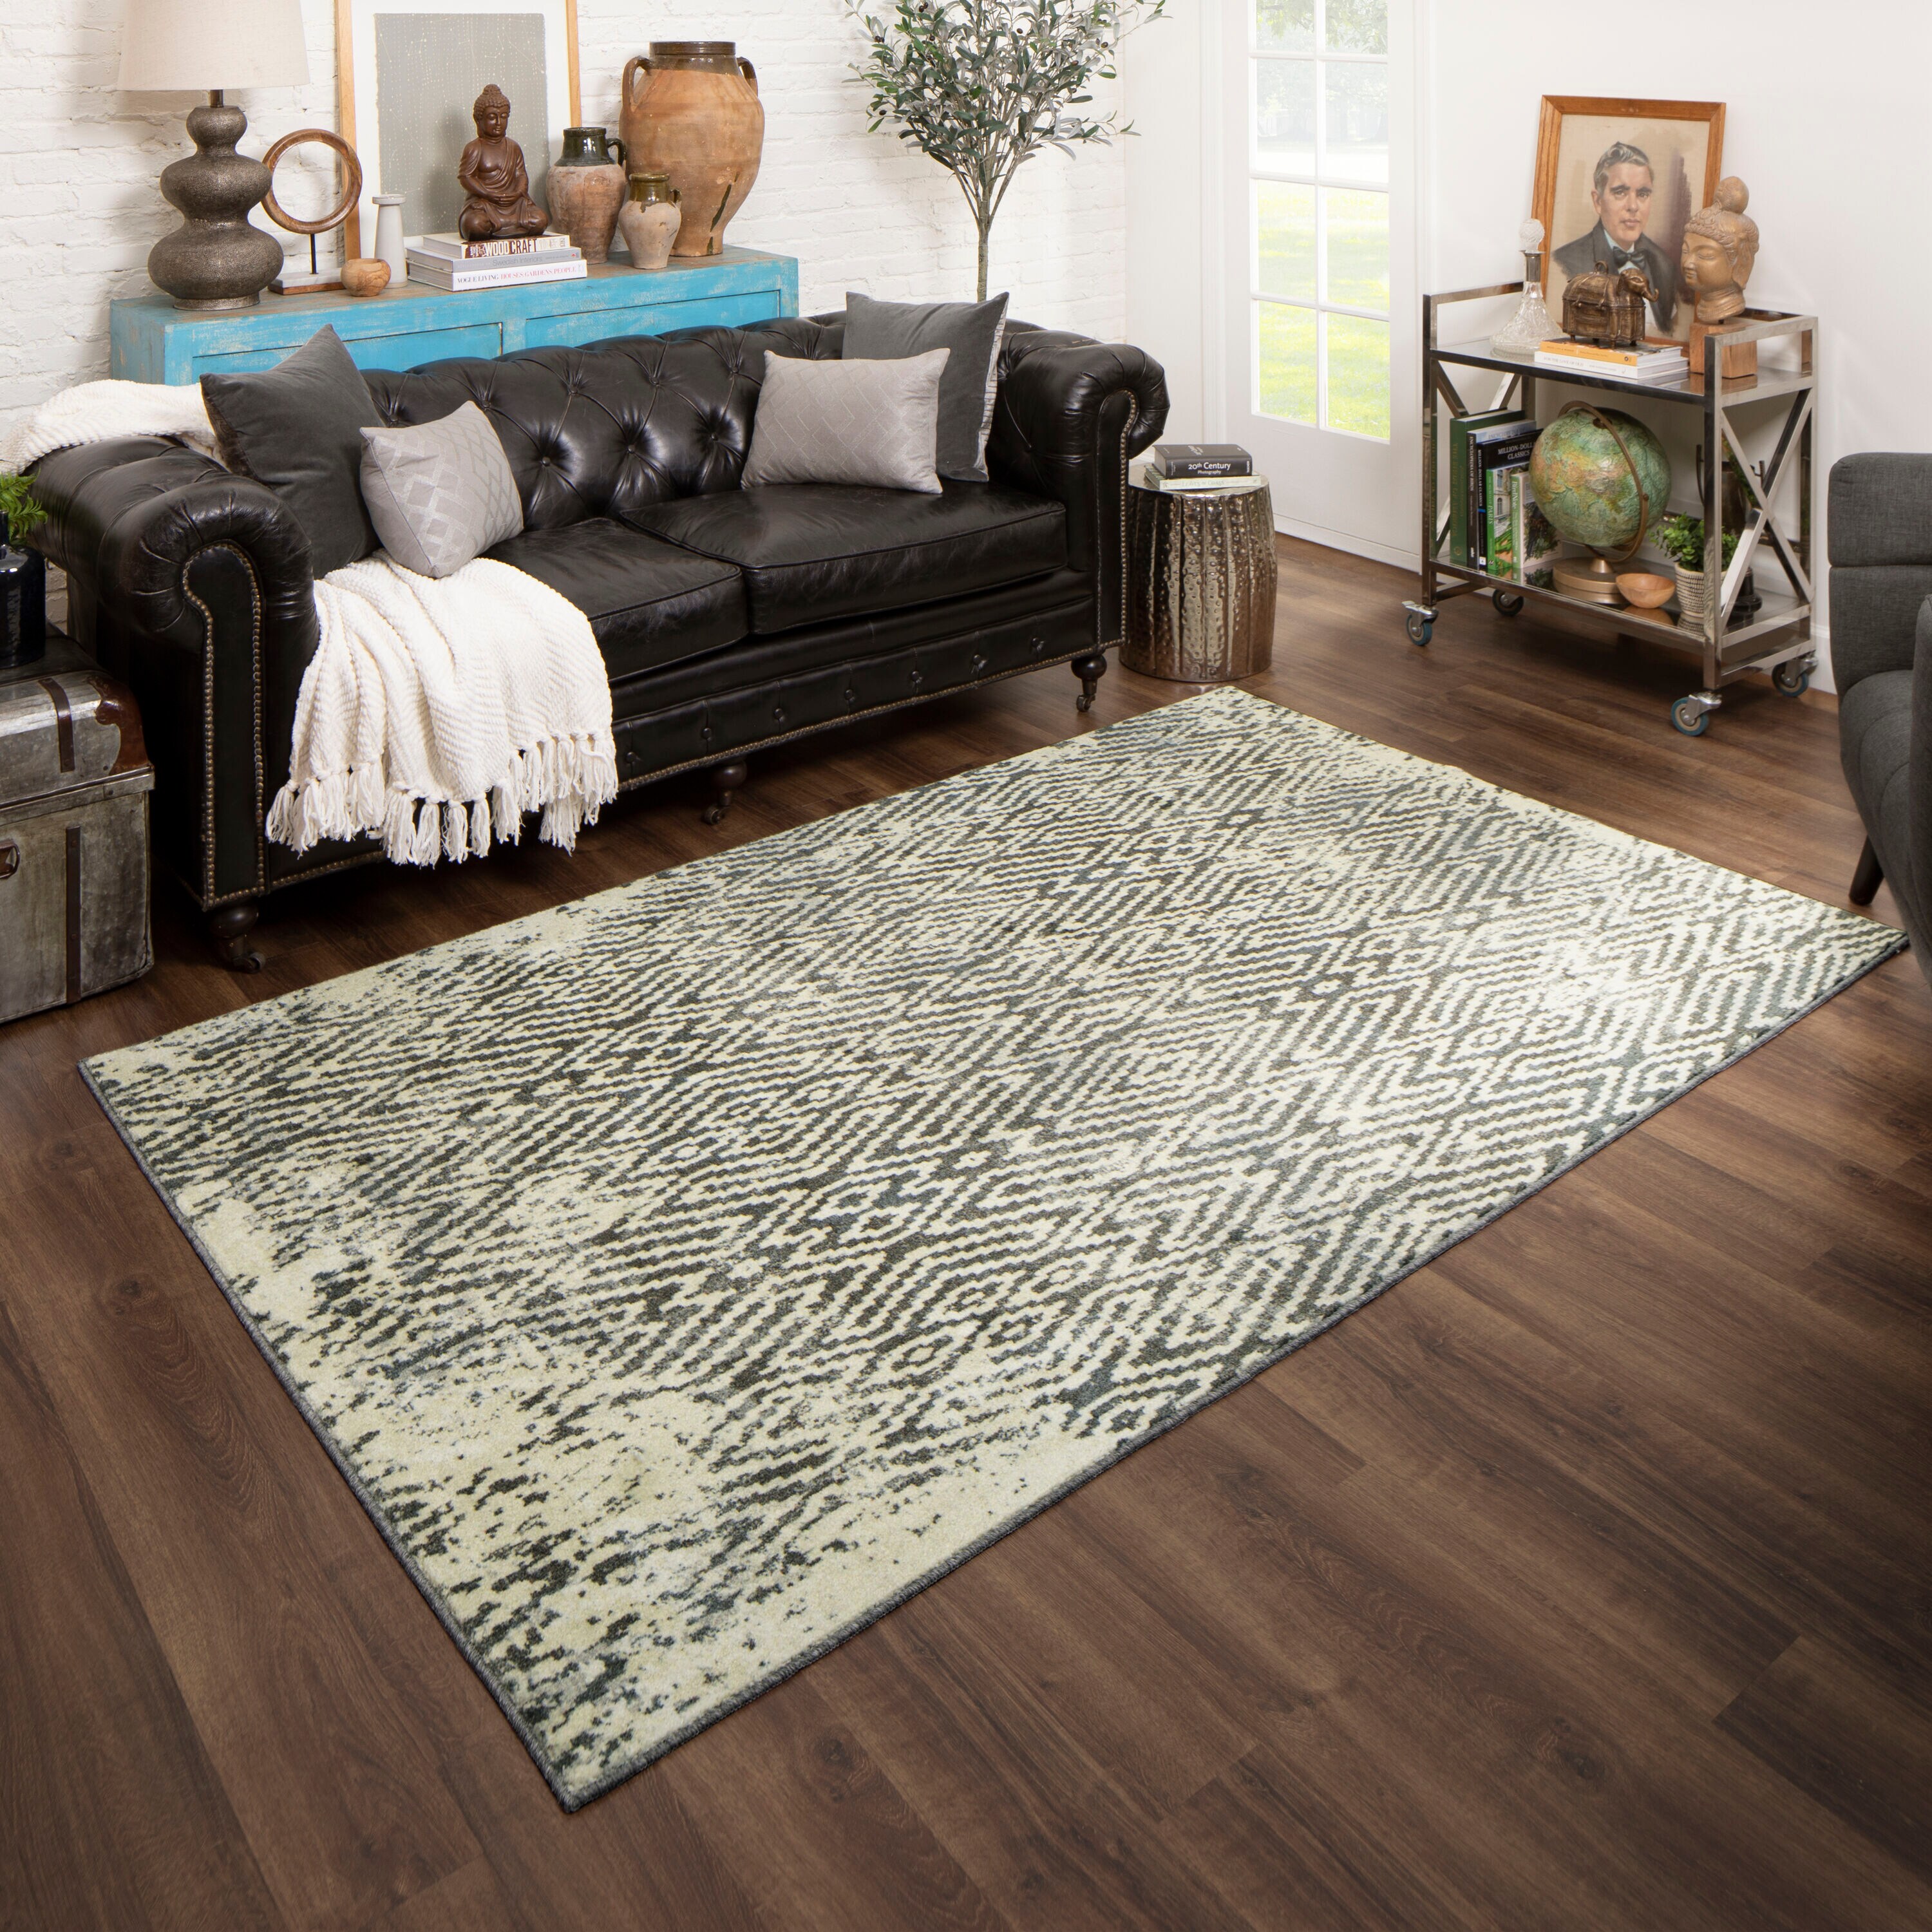 Mohawk Home 9 x 12 Rugs at Lowes.com